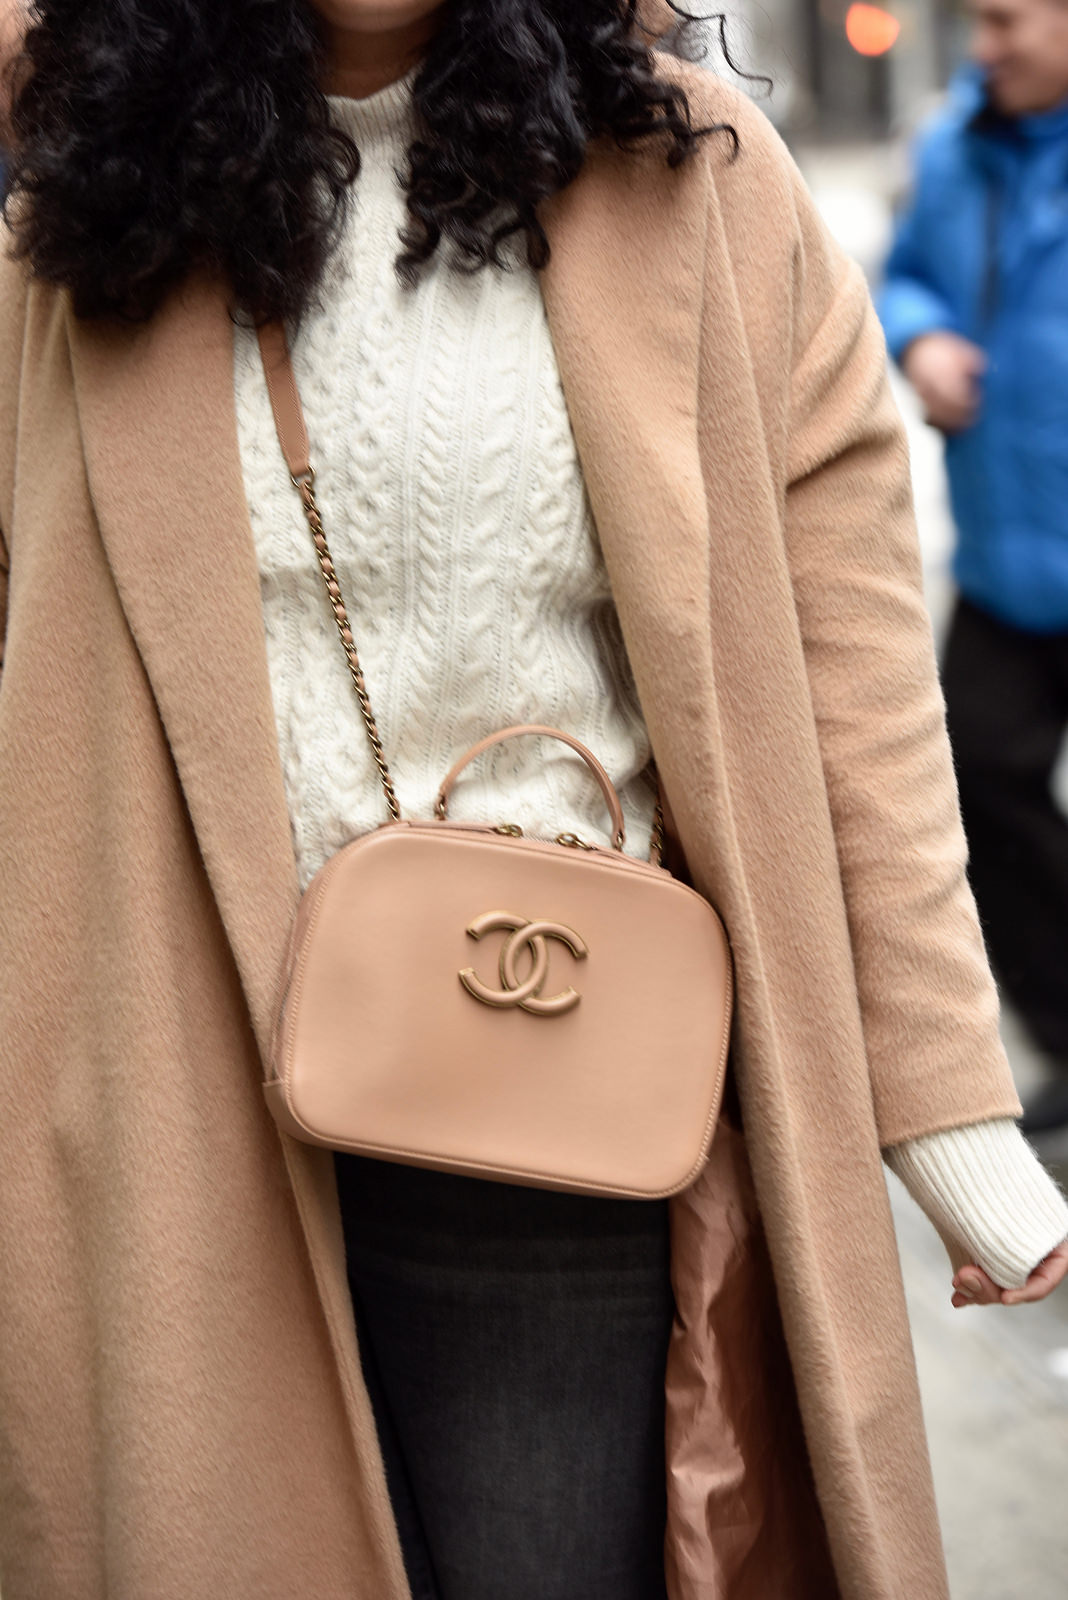 A casually chic take on winter neutrals